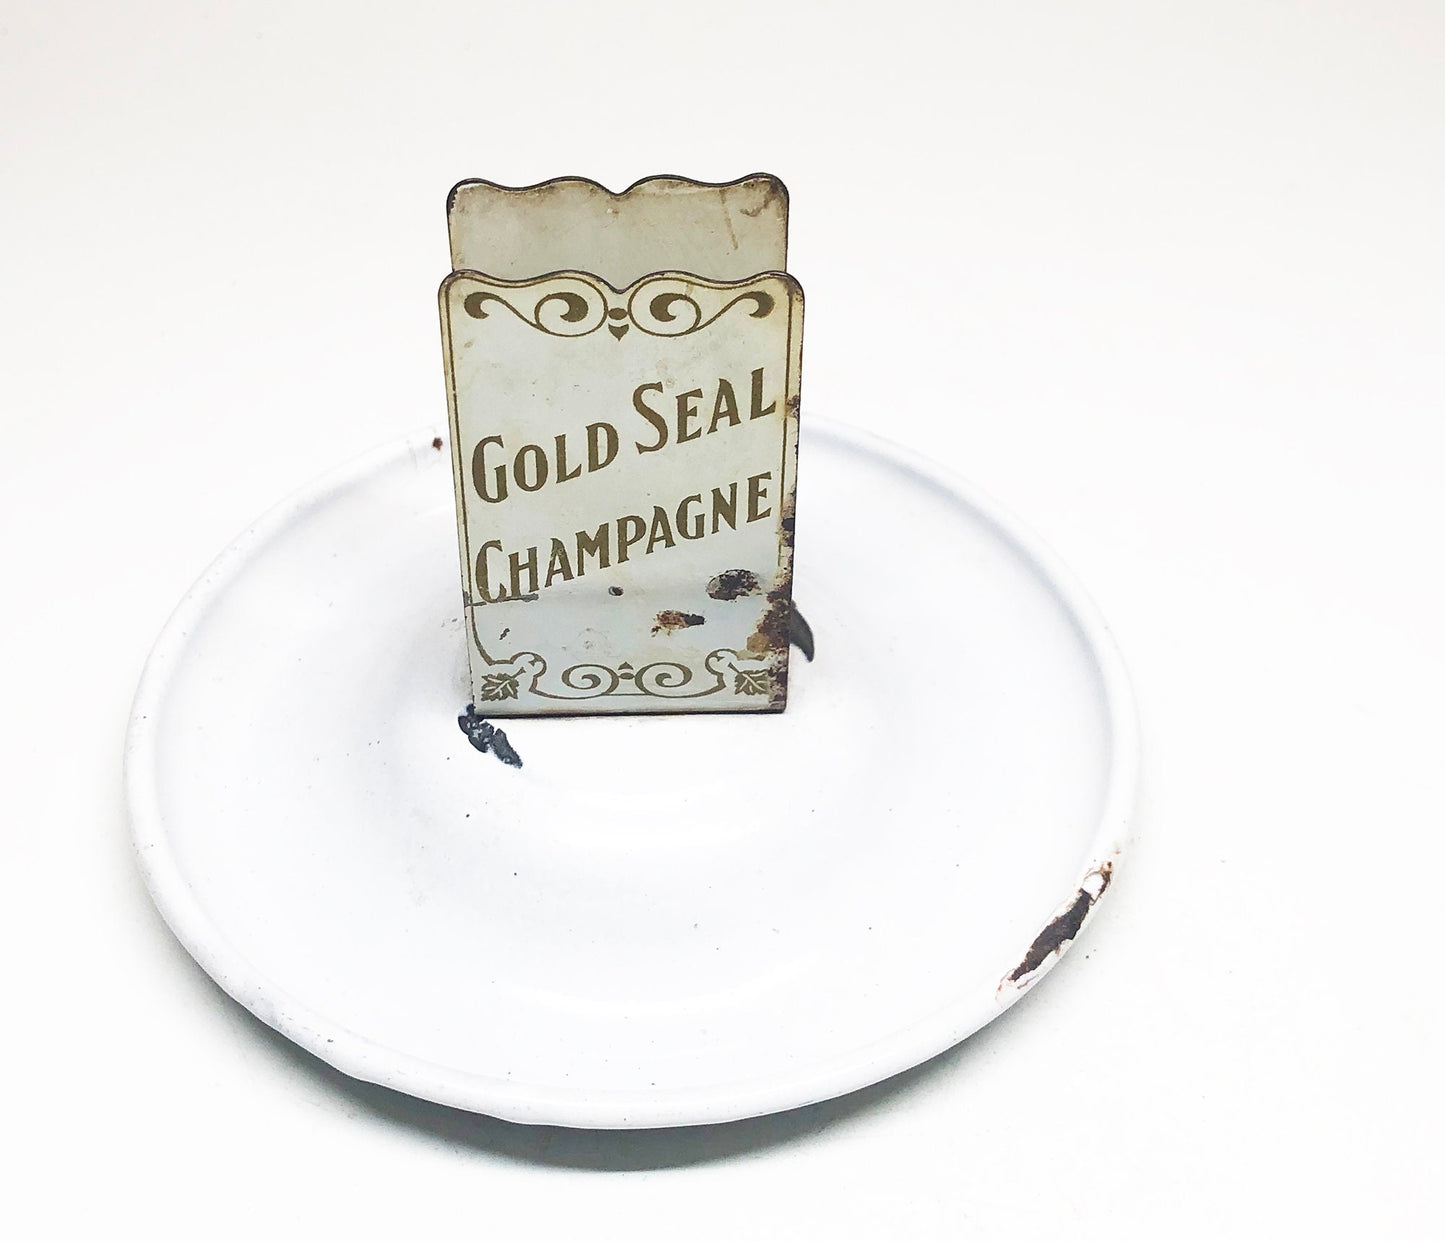 Early 1900s Gold Seal Champagne Ashtray / Matchbook Holder